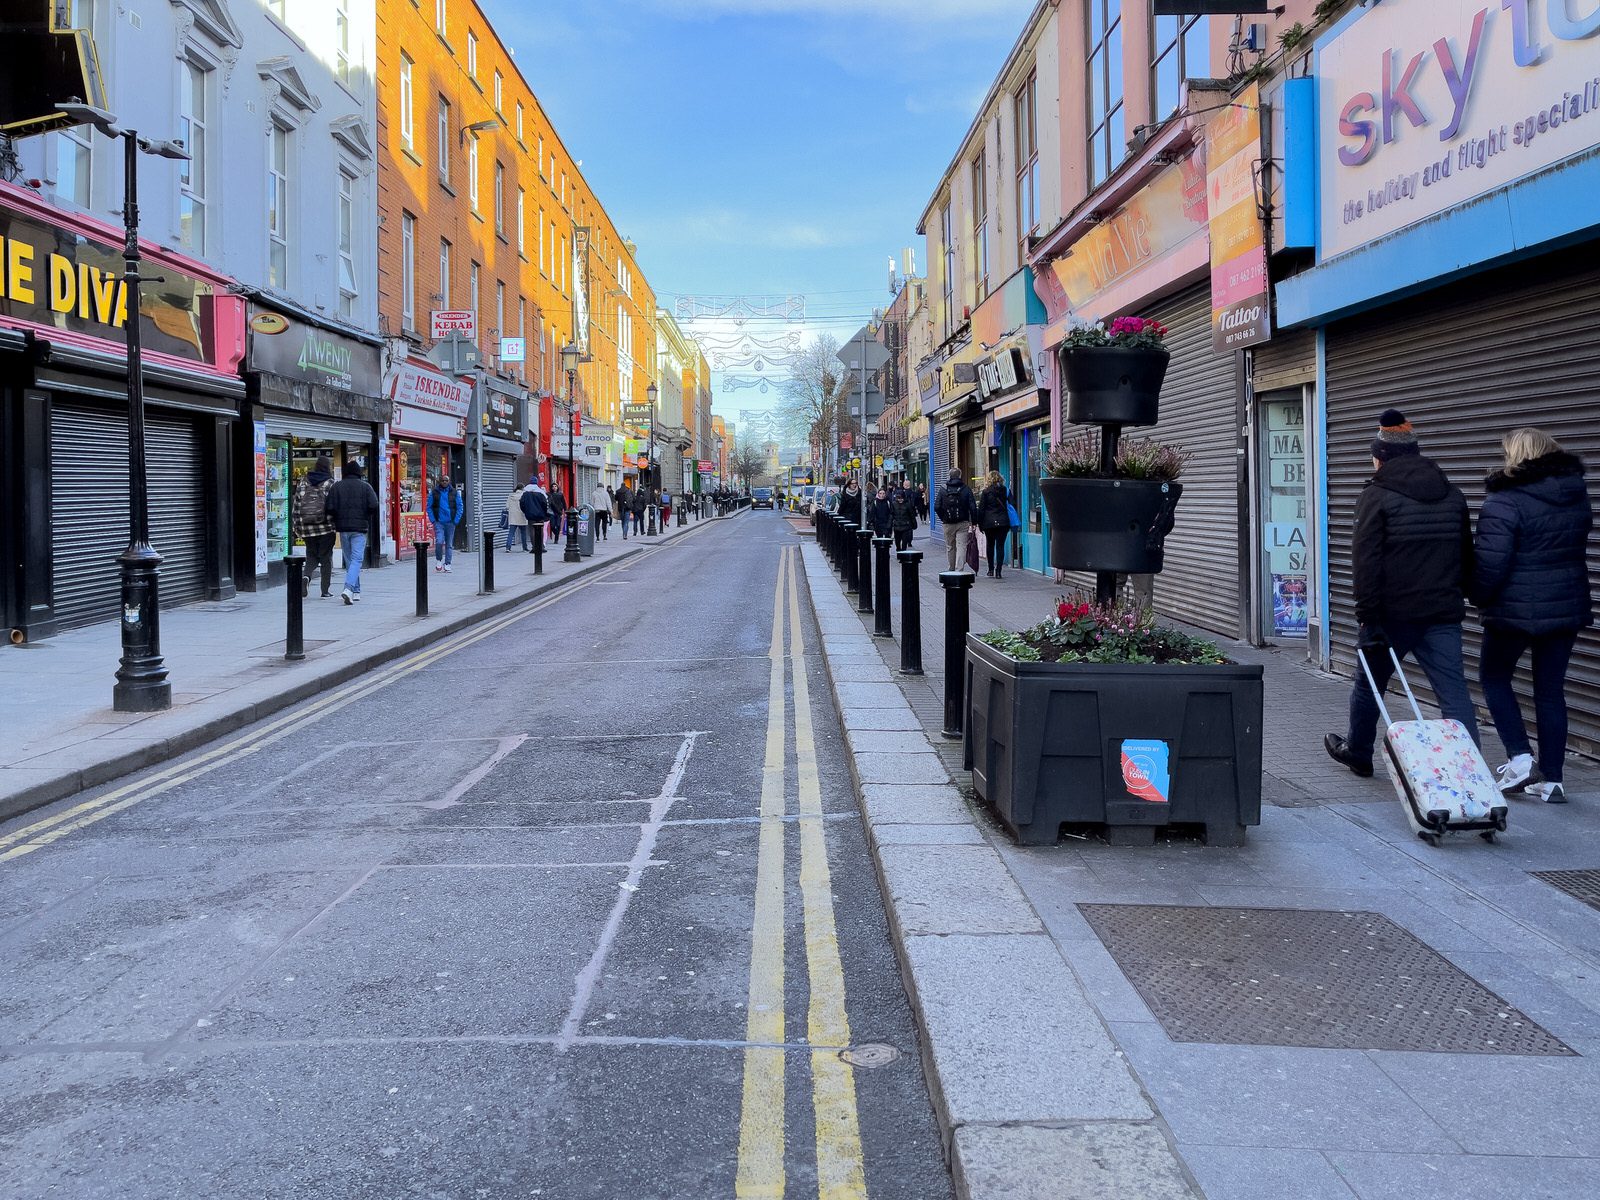 TALBOT STREET [FAILS TO MEET ITS POTENTIAL AS A MAJOR SHOPPING STREET]-225715-1